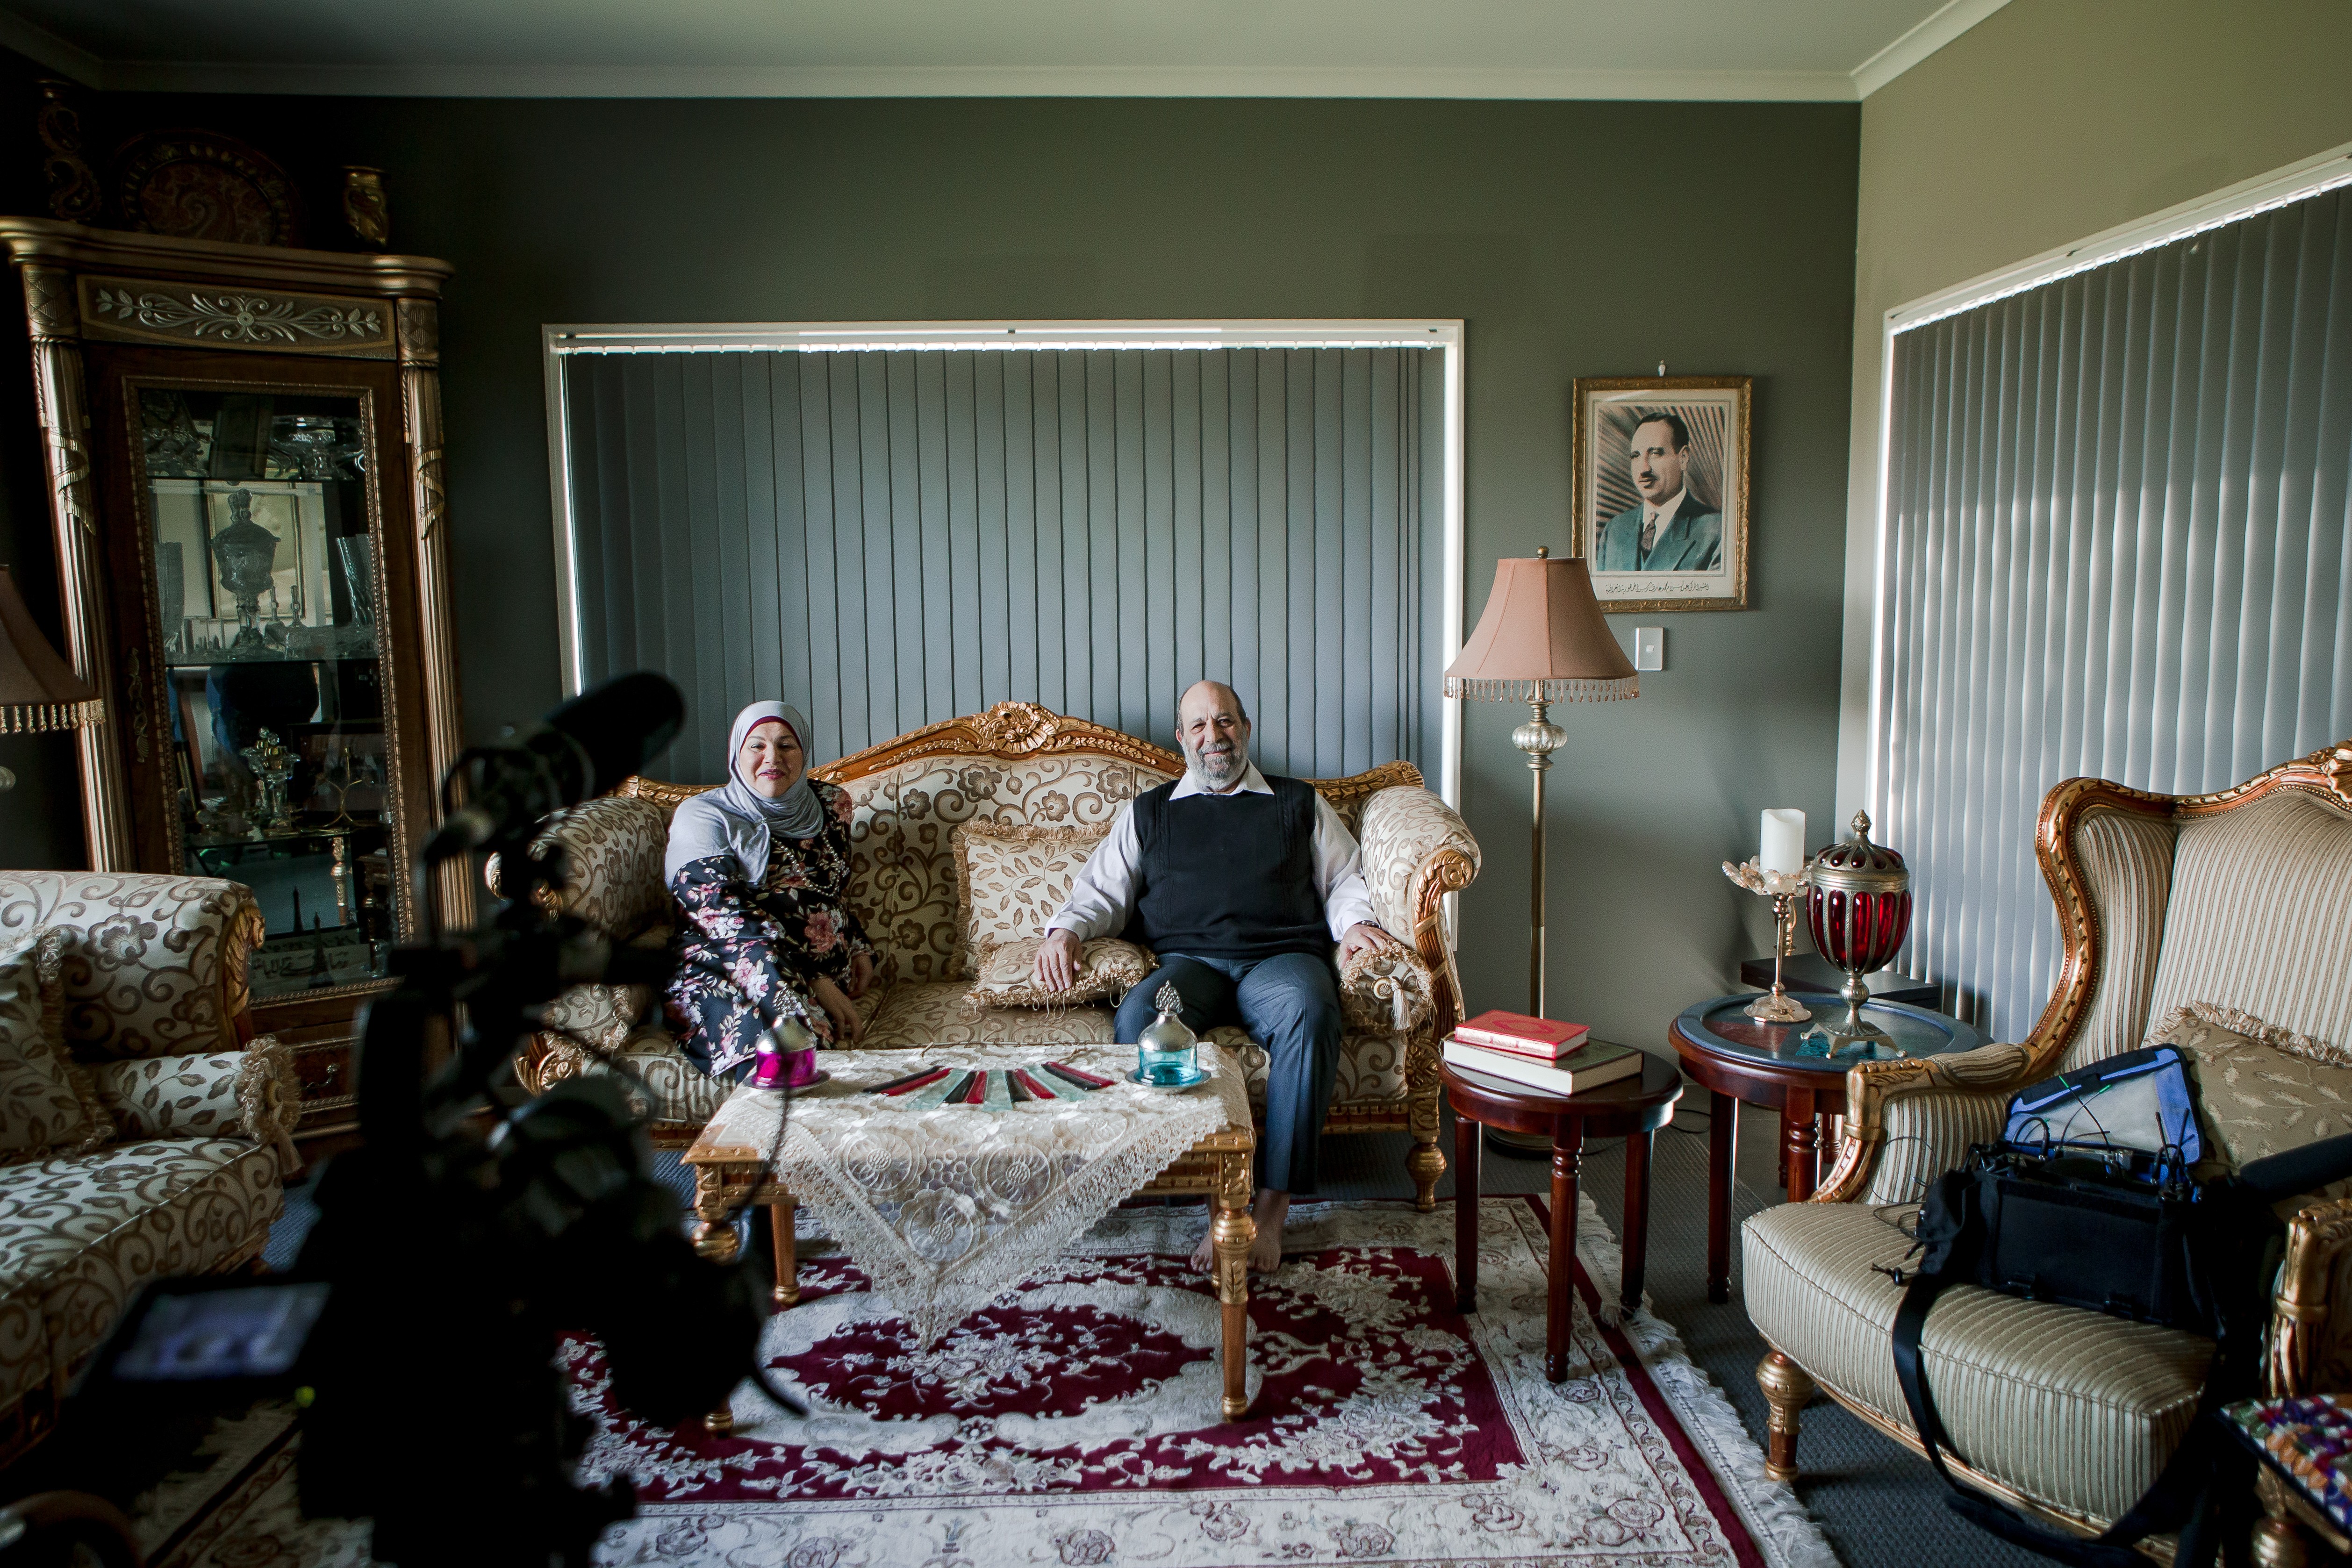 A woman in a headscarf and a man sit on a couch in a living room, with a big Persian rug. Sound and filming equipment faces them.